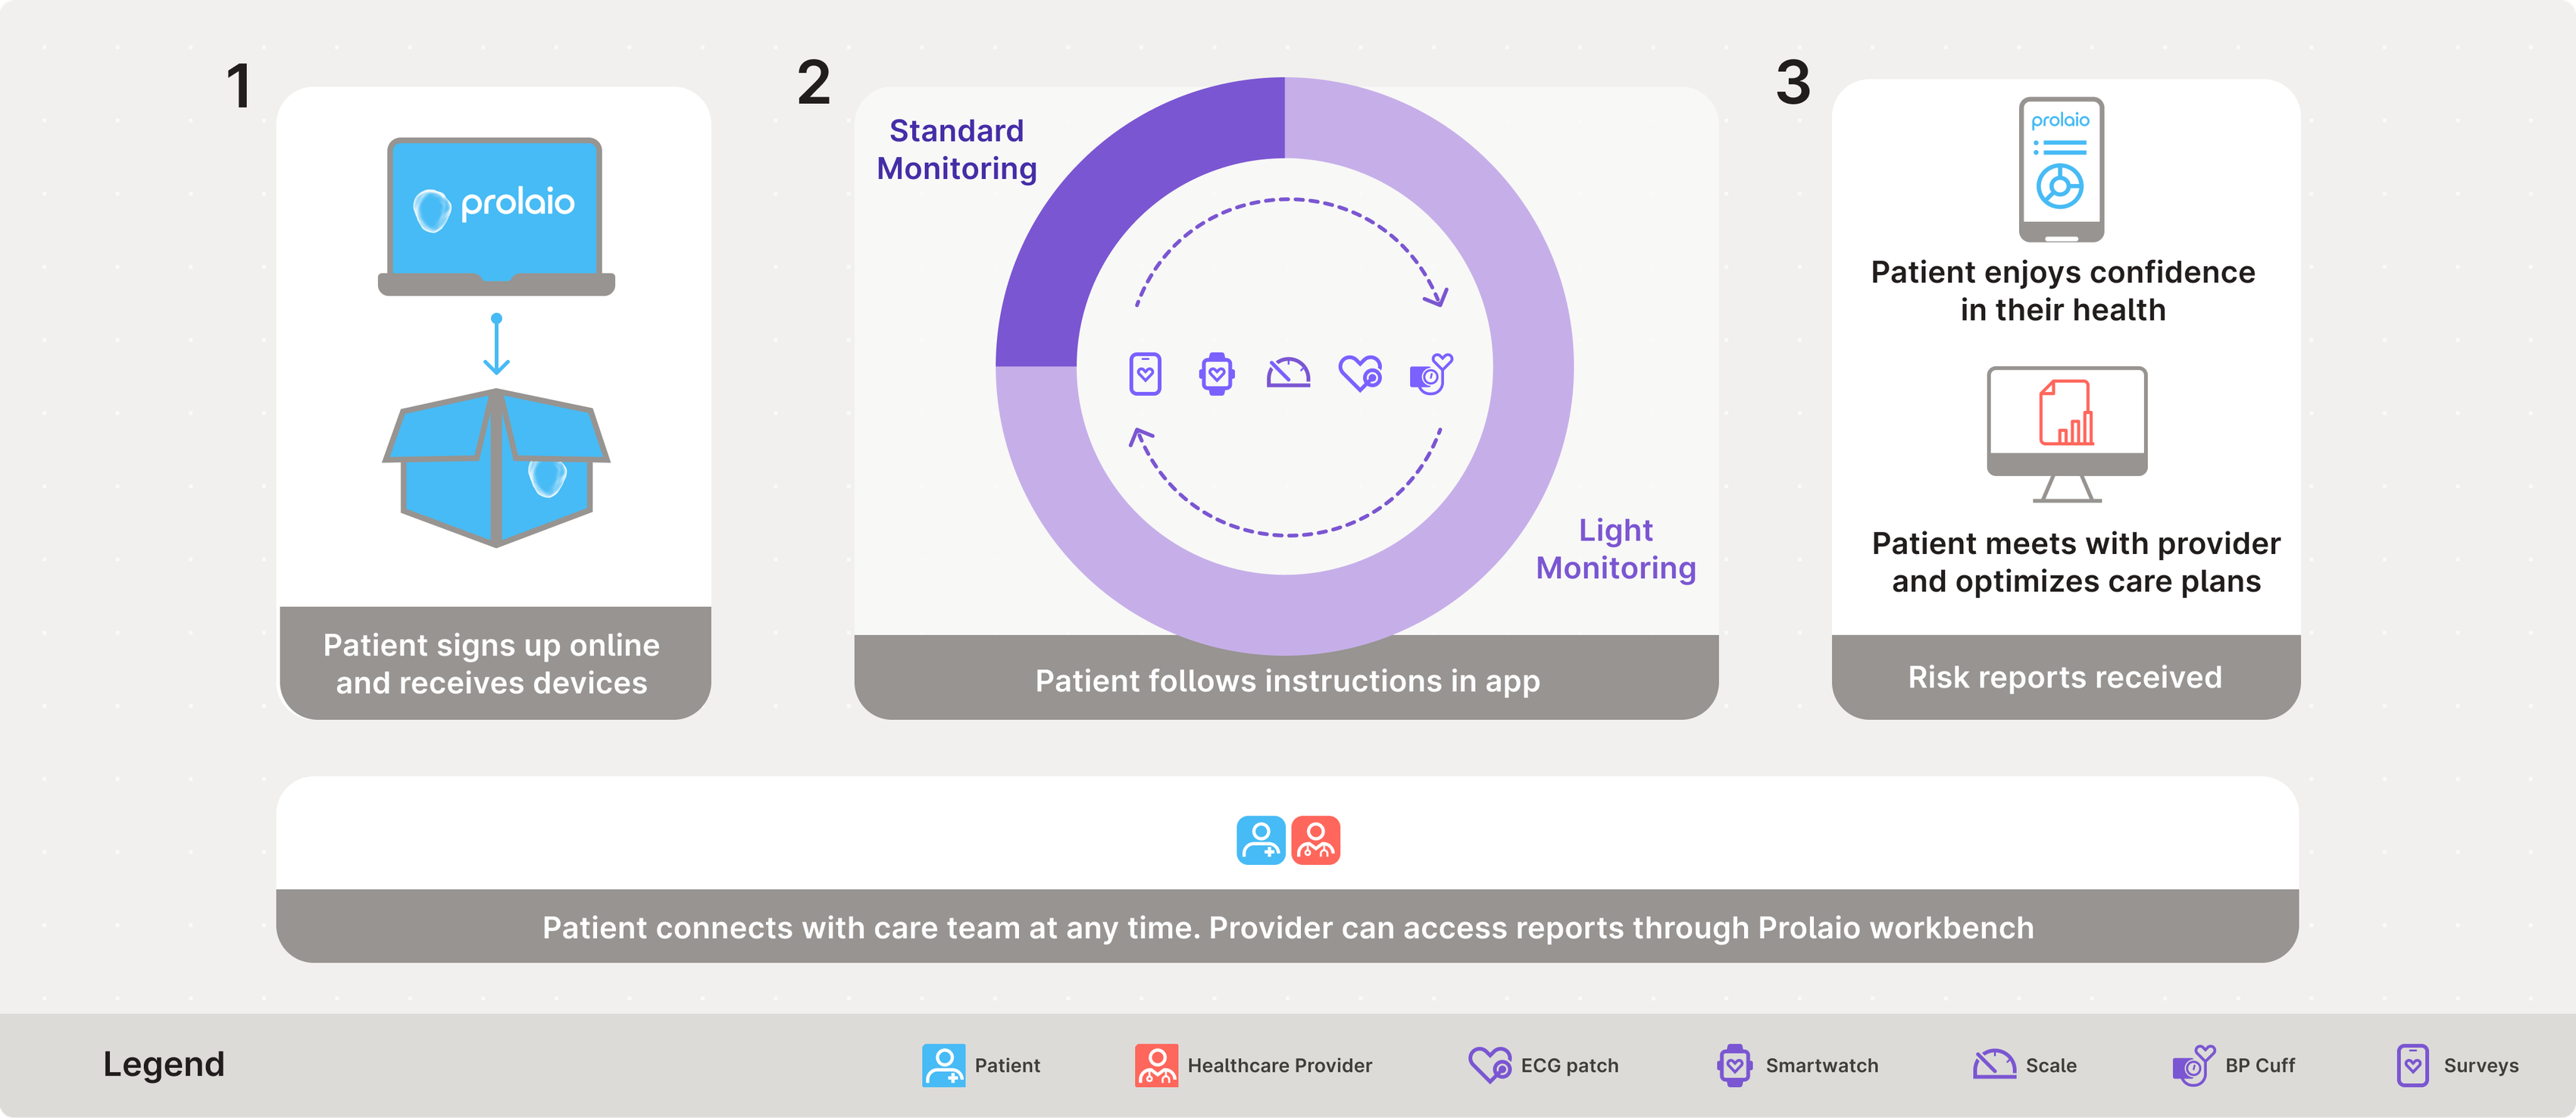 Infographic showing steps for a patient to use Prolaio